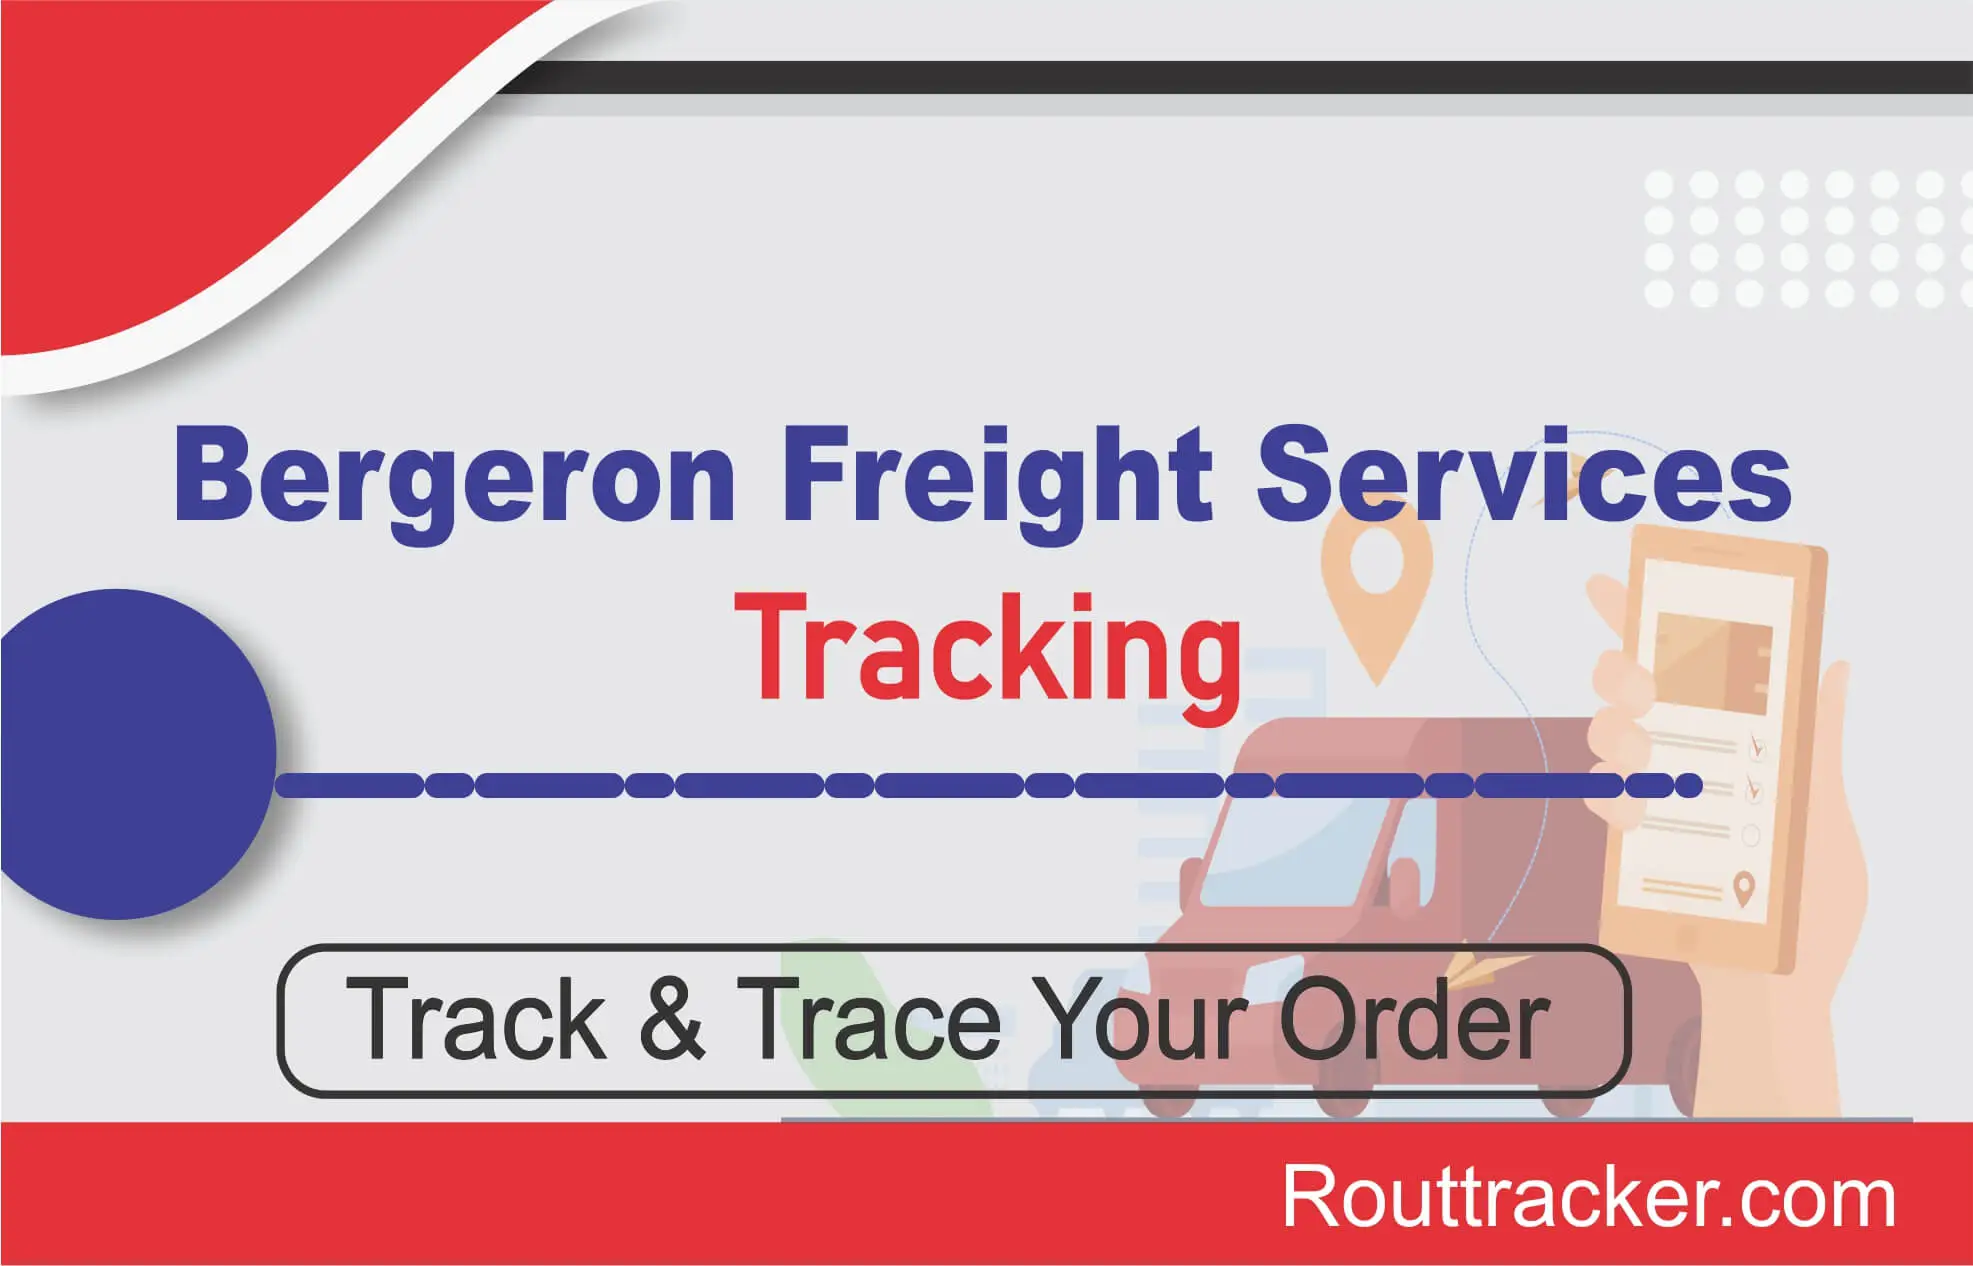 Bergeron Freight Services Tracking